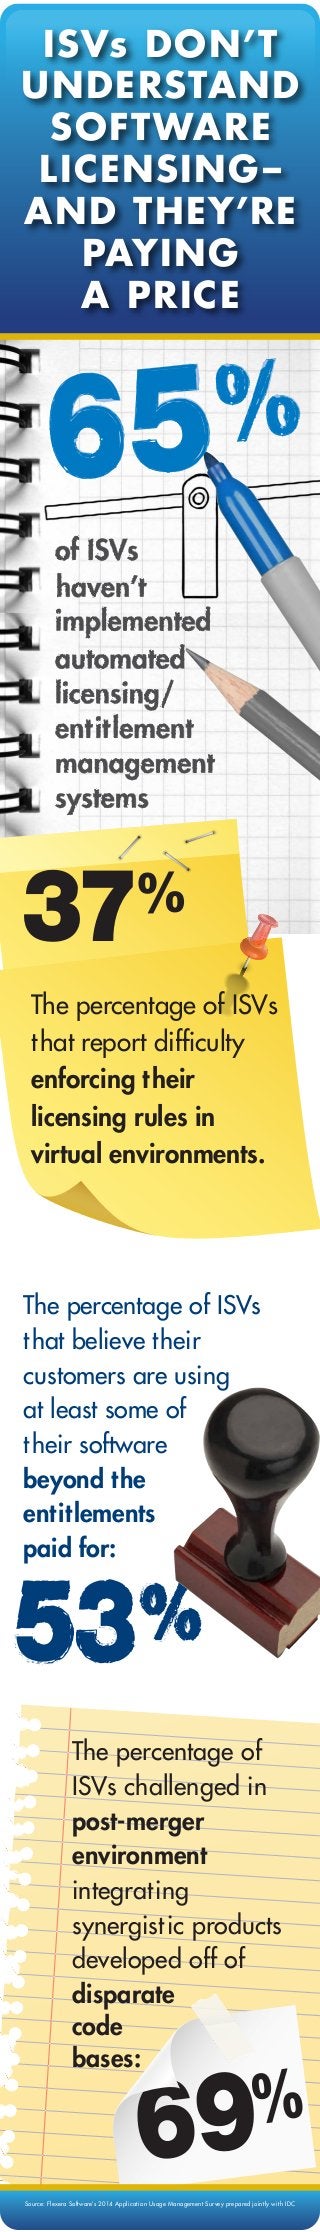 ISVs DON’T
UNDERSTAND
SOFTWARE
LICENSING –
AND THEY’RE
PAYING
A PRICE

37

%

The percentage of ISVs
that report difﬁculty
enforcing their
licensing rules in
virtual environments.

The percentage of ISVs
that believe their
customers are using
at least some of
their software
beyond the
entitlements
paid for:

The percentage of
ISVs challenged in
post-merger
environment
integrating
synergistic products
developed off of
disparate
code
bases:

Source: Flexera Software’s 2014 Applicat ion Usage Management Survey prepared joint ly wit h IDC

 